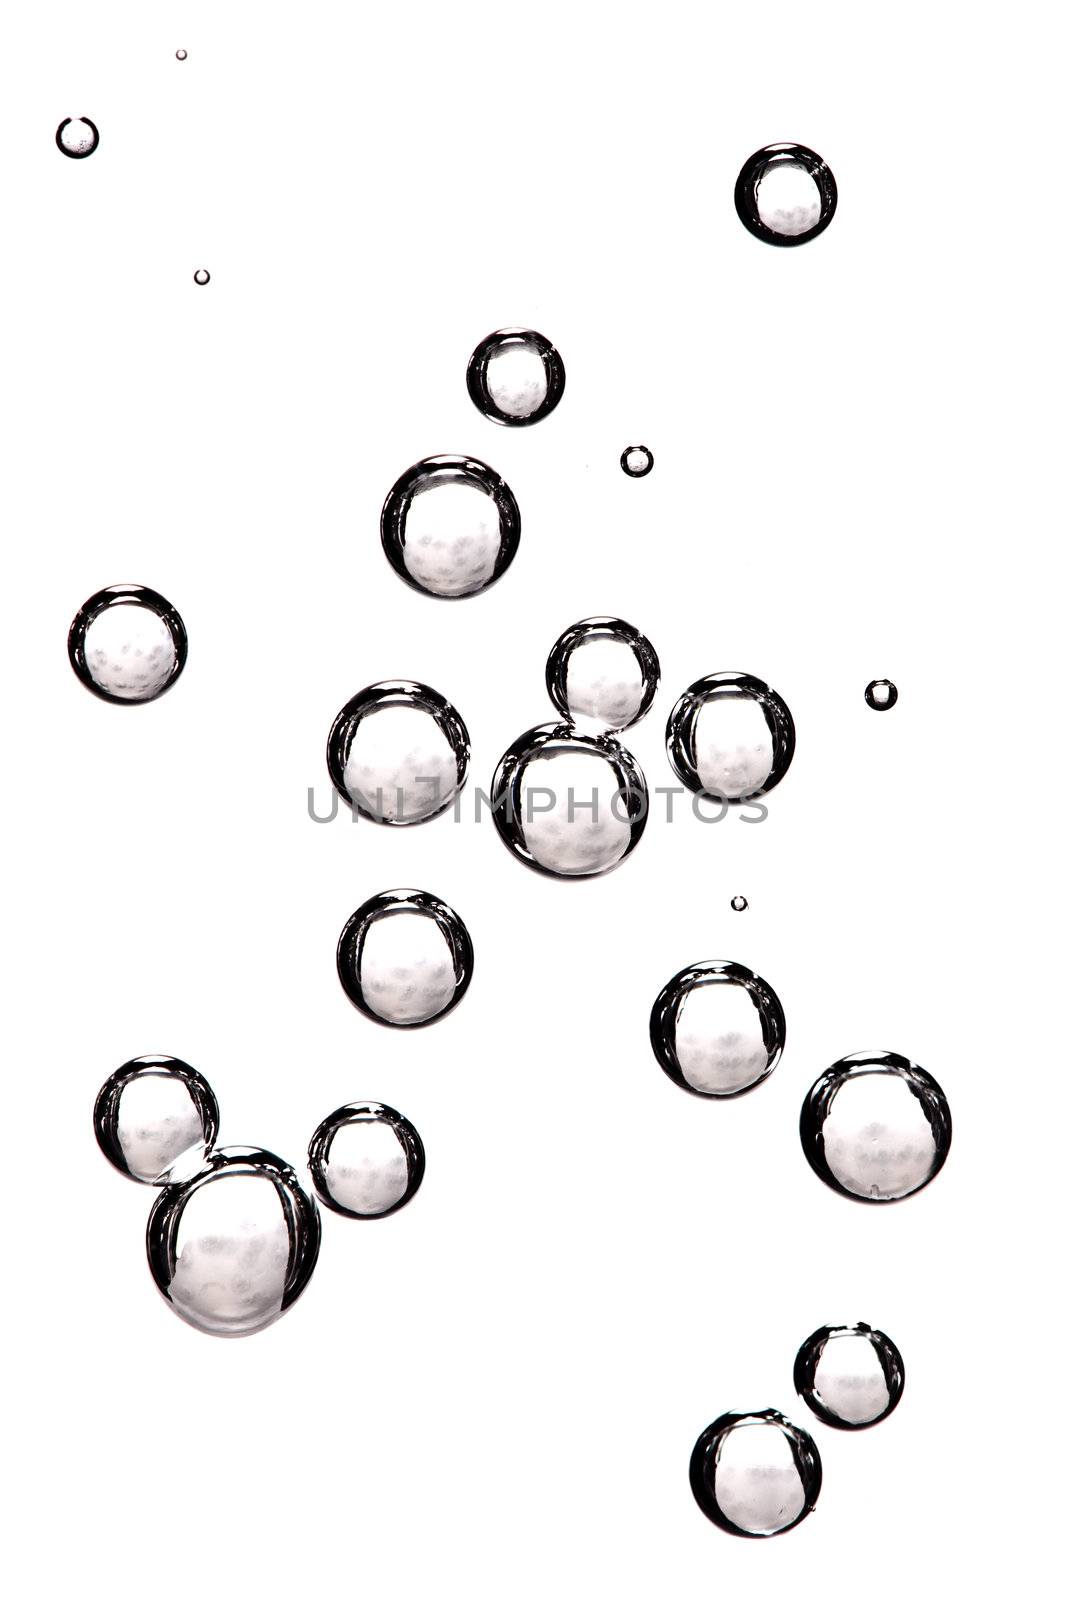 air bubbles in water, abstract close up photo